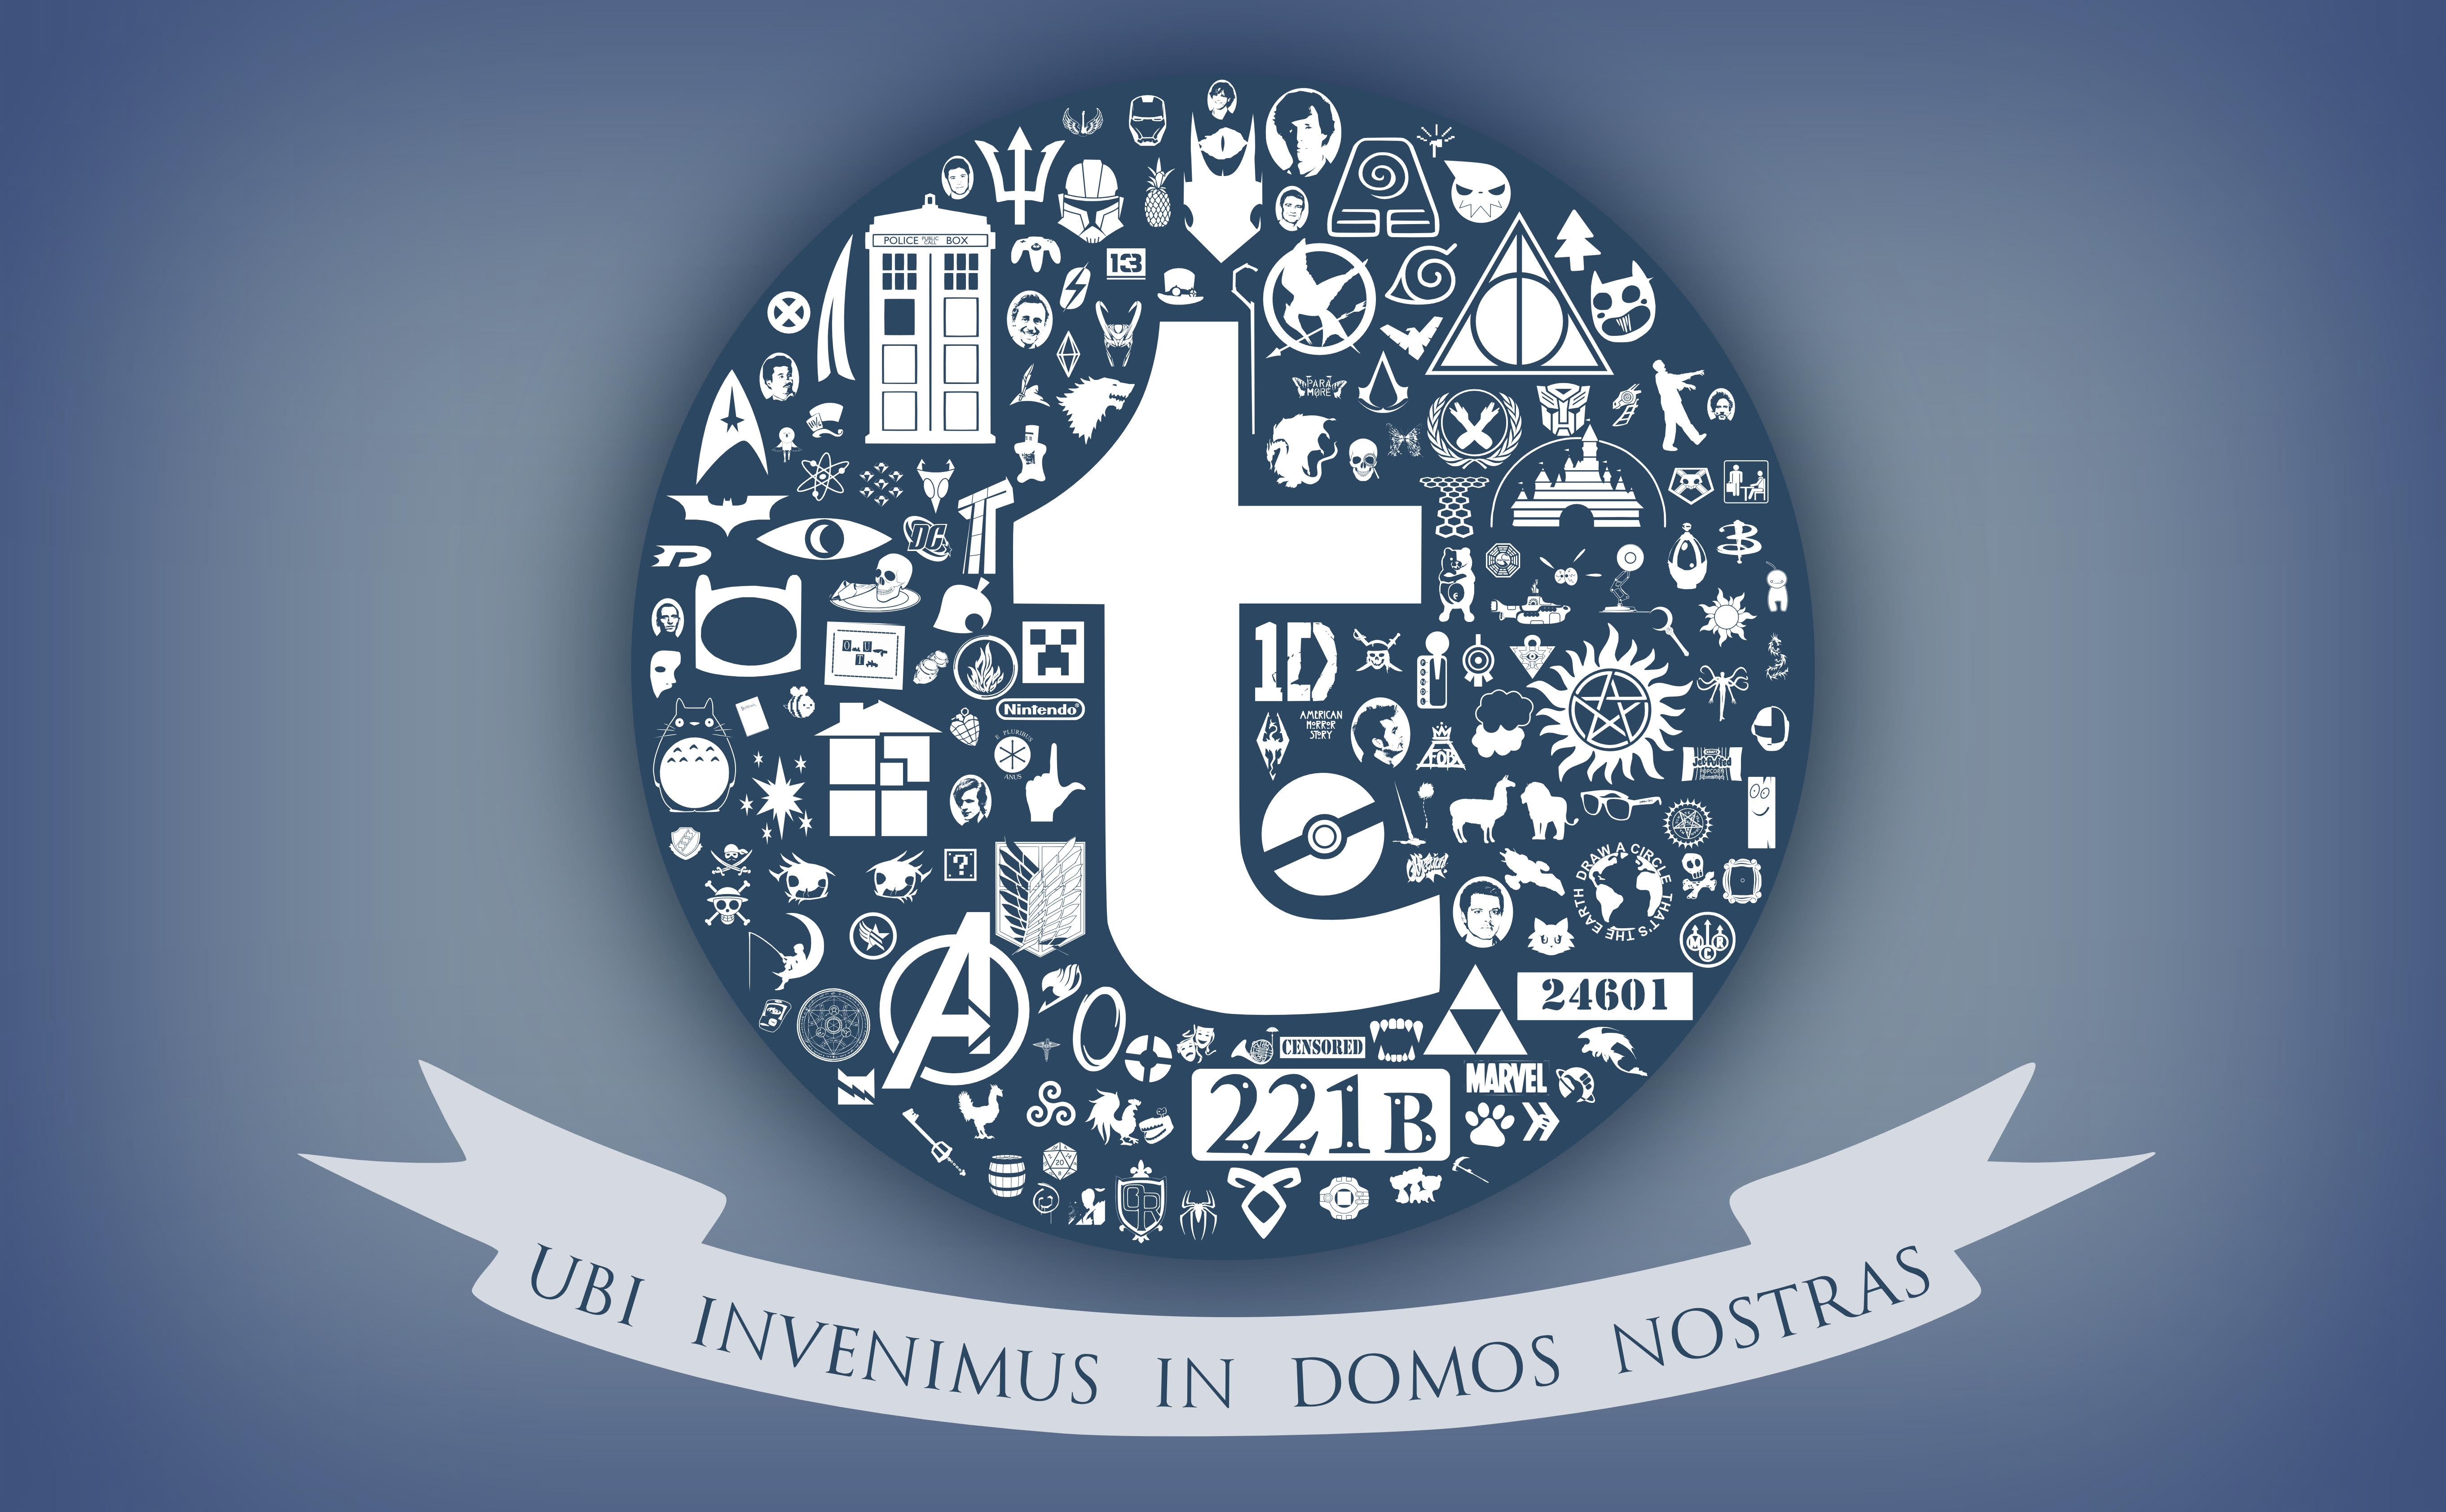 Tumblr-blue image with symbols of various fandoms surrounding a lowercase t in Tumblr's font. Text underneath reads "Ubi invenimus in domos nostras" (Here we found our homes).